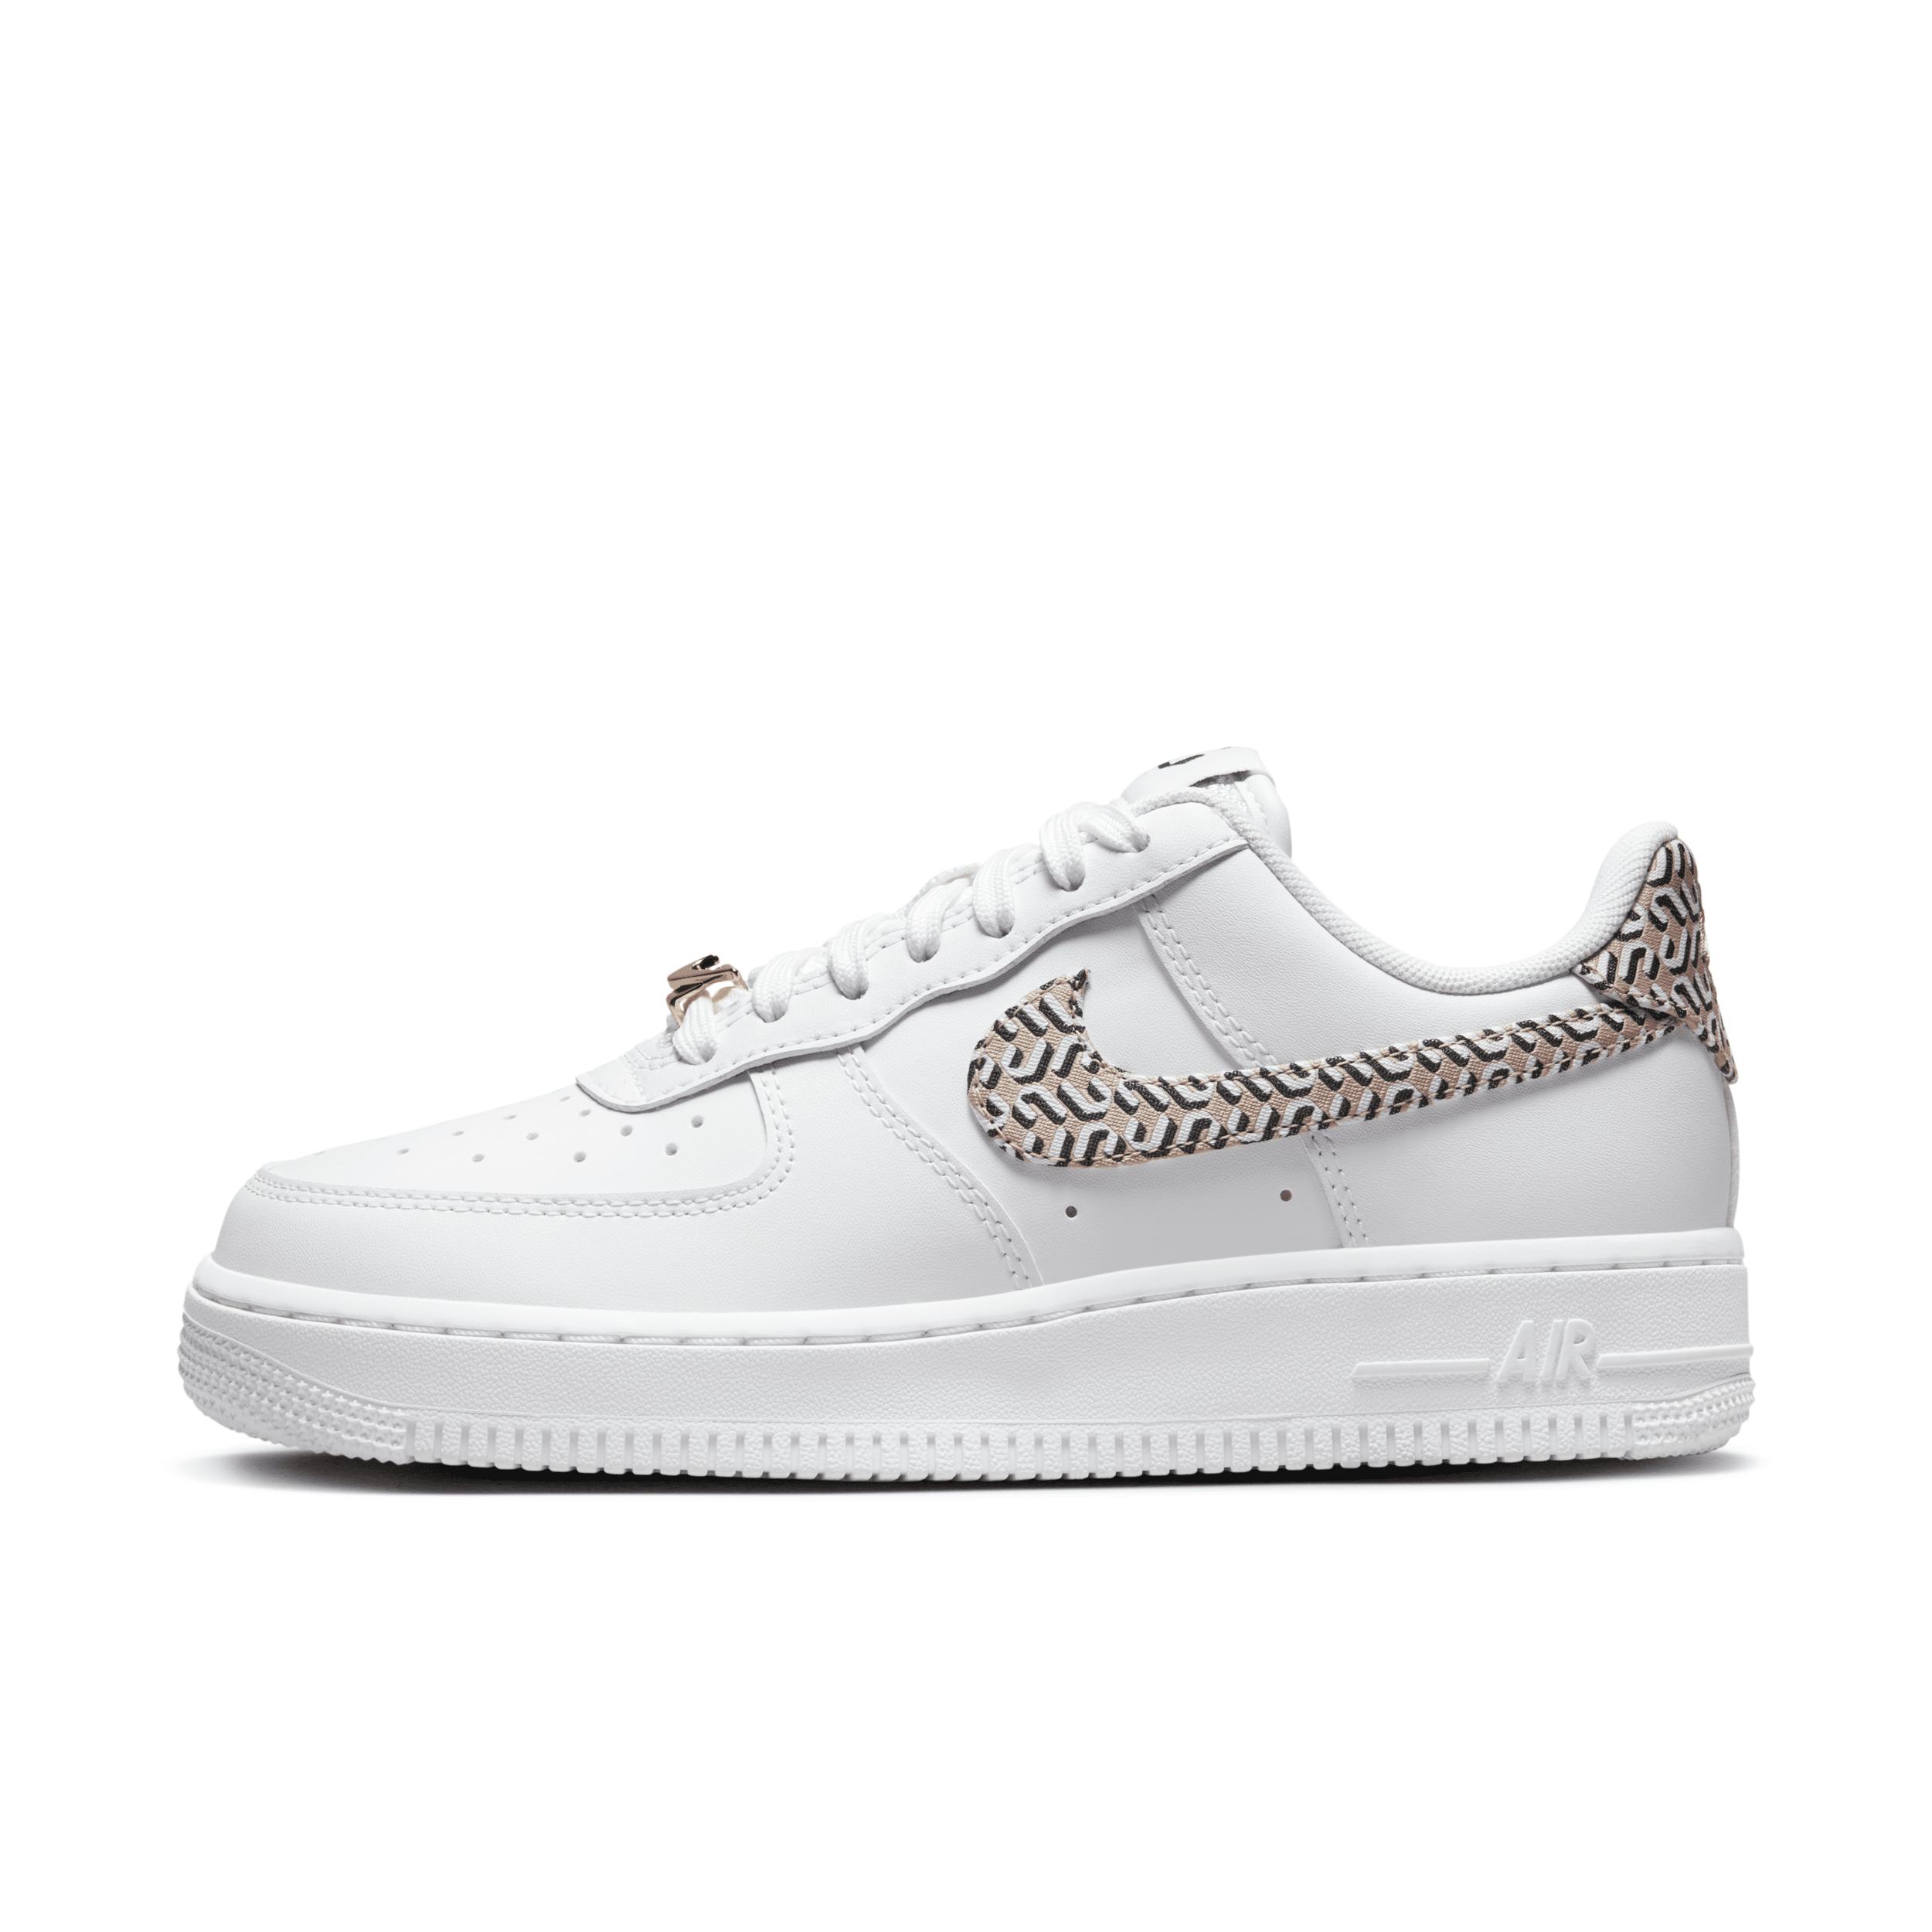 Nike Air Force 1 Lx United Shoes in White | Lyst